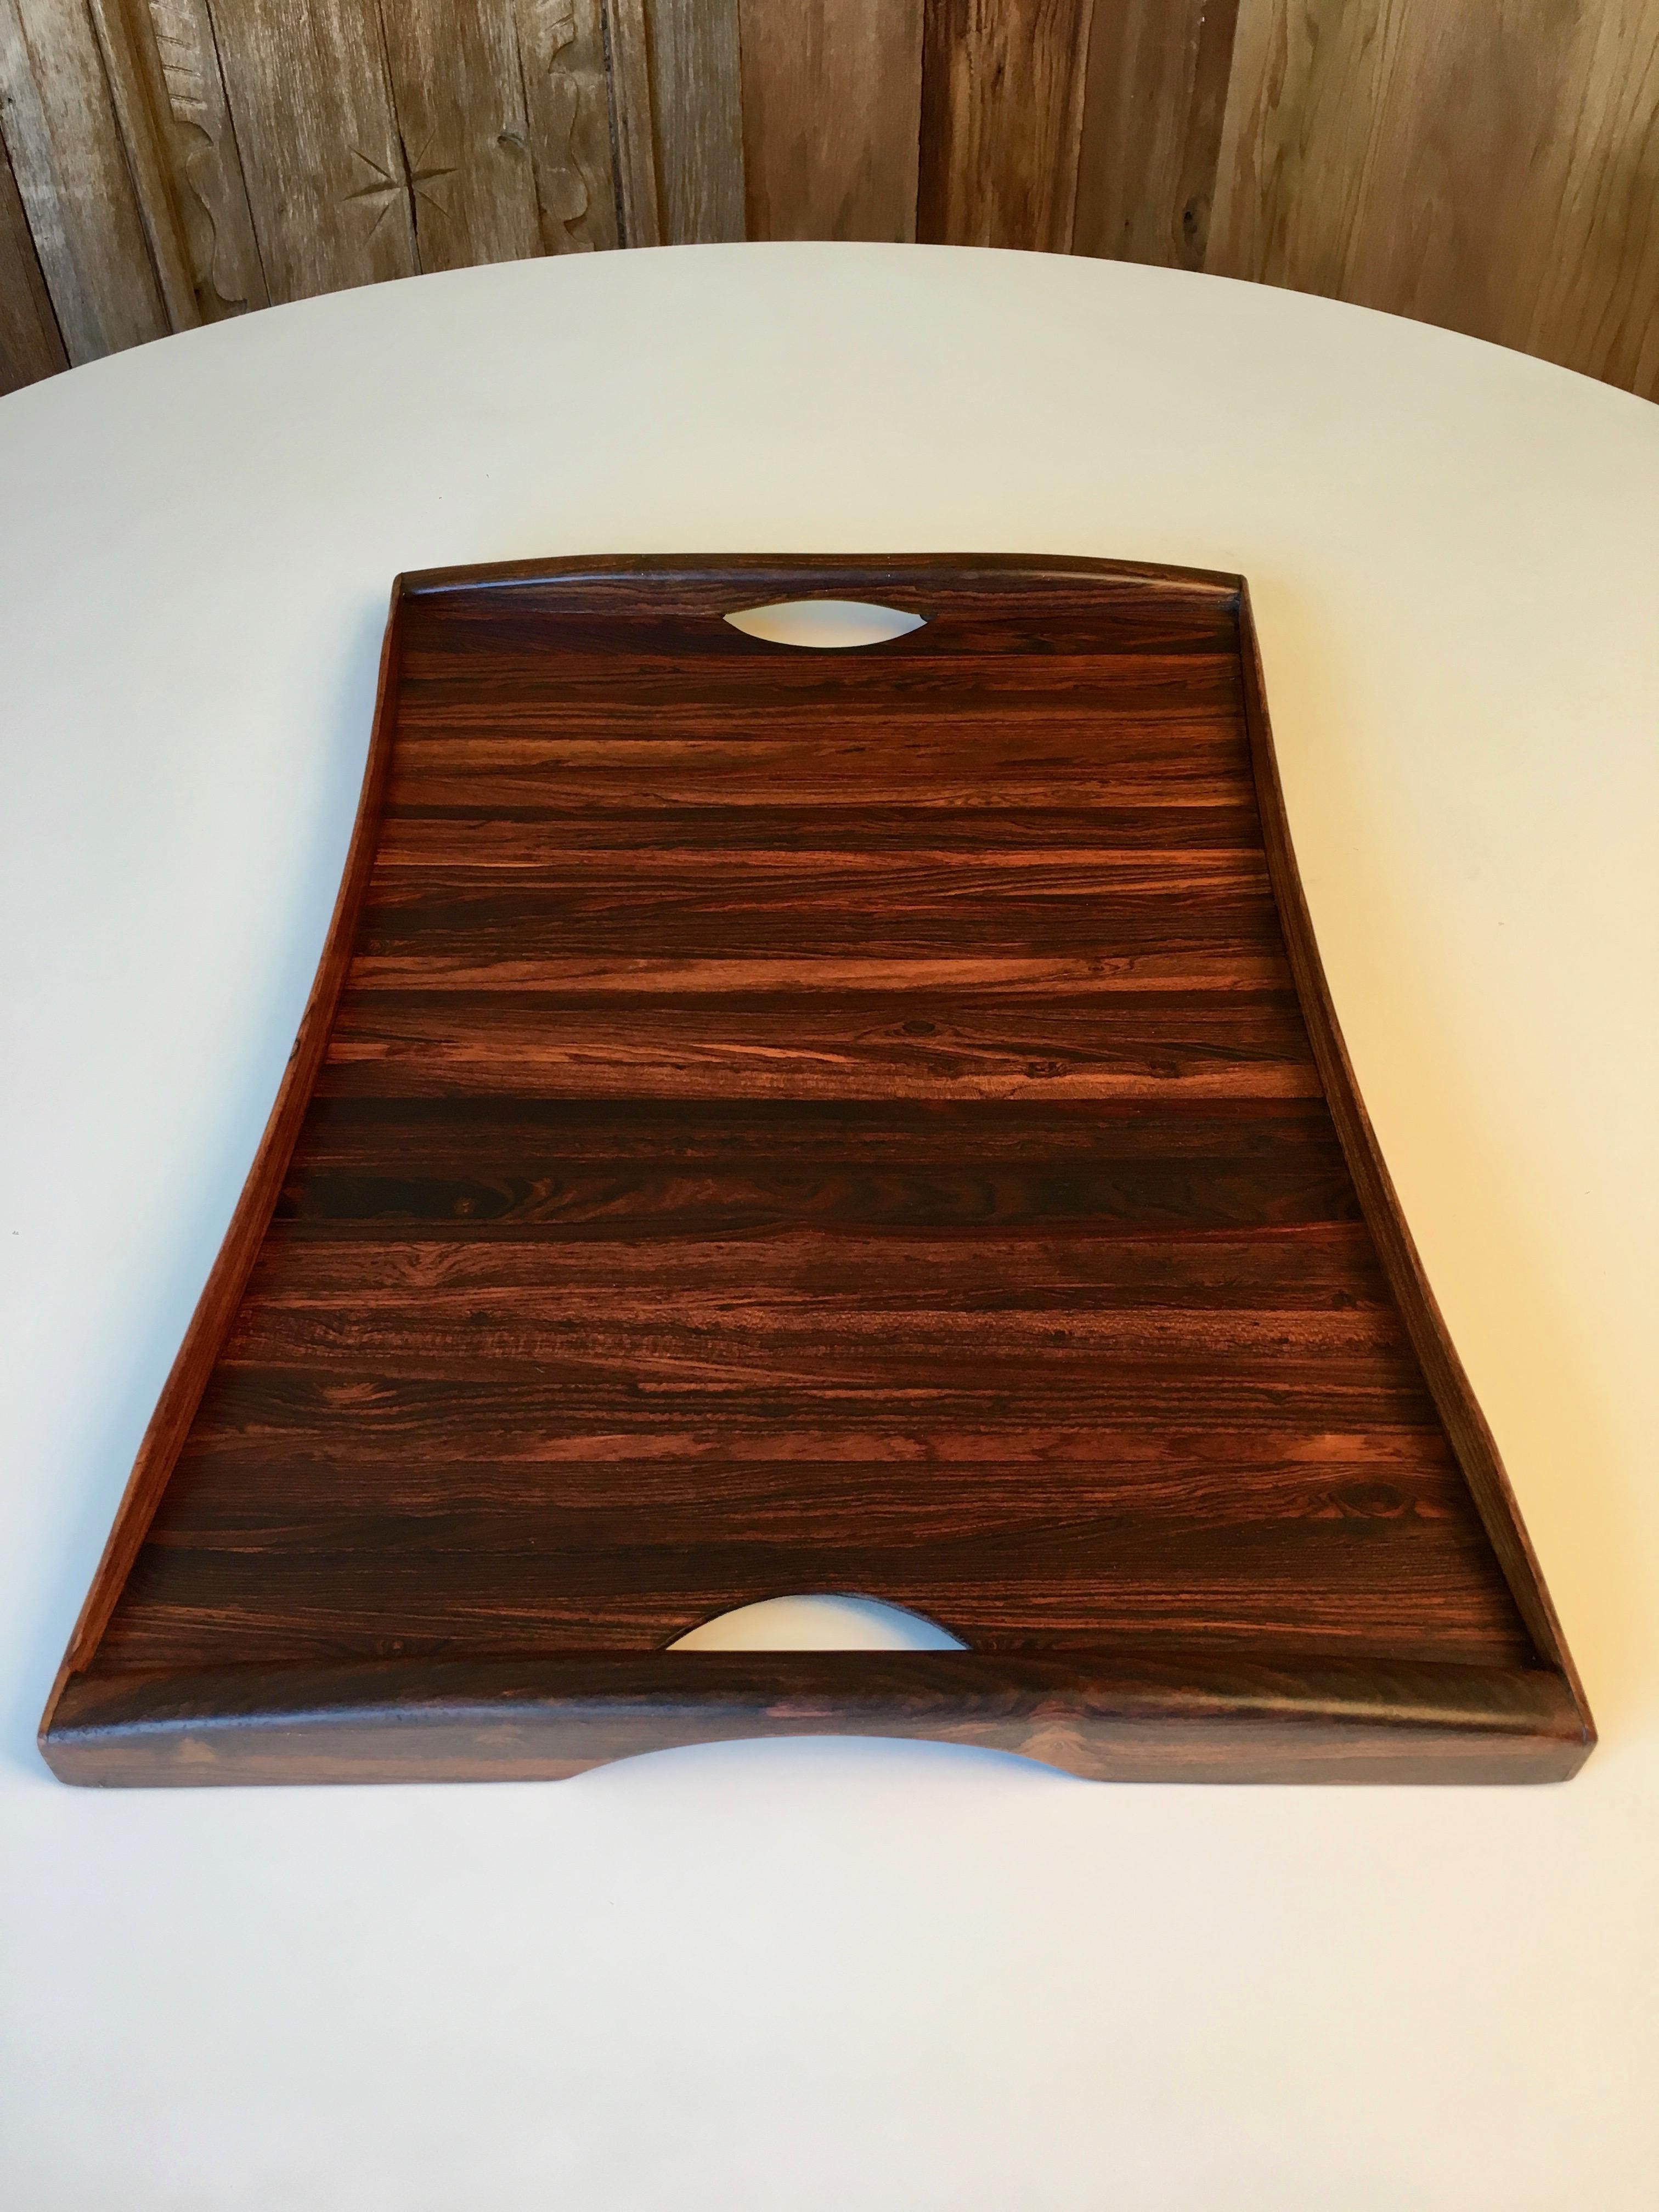 Mexican Don Shoemaker Exotic Hardwood Serving Tray